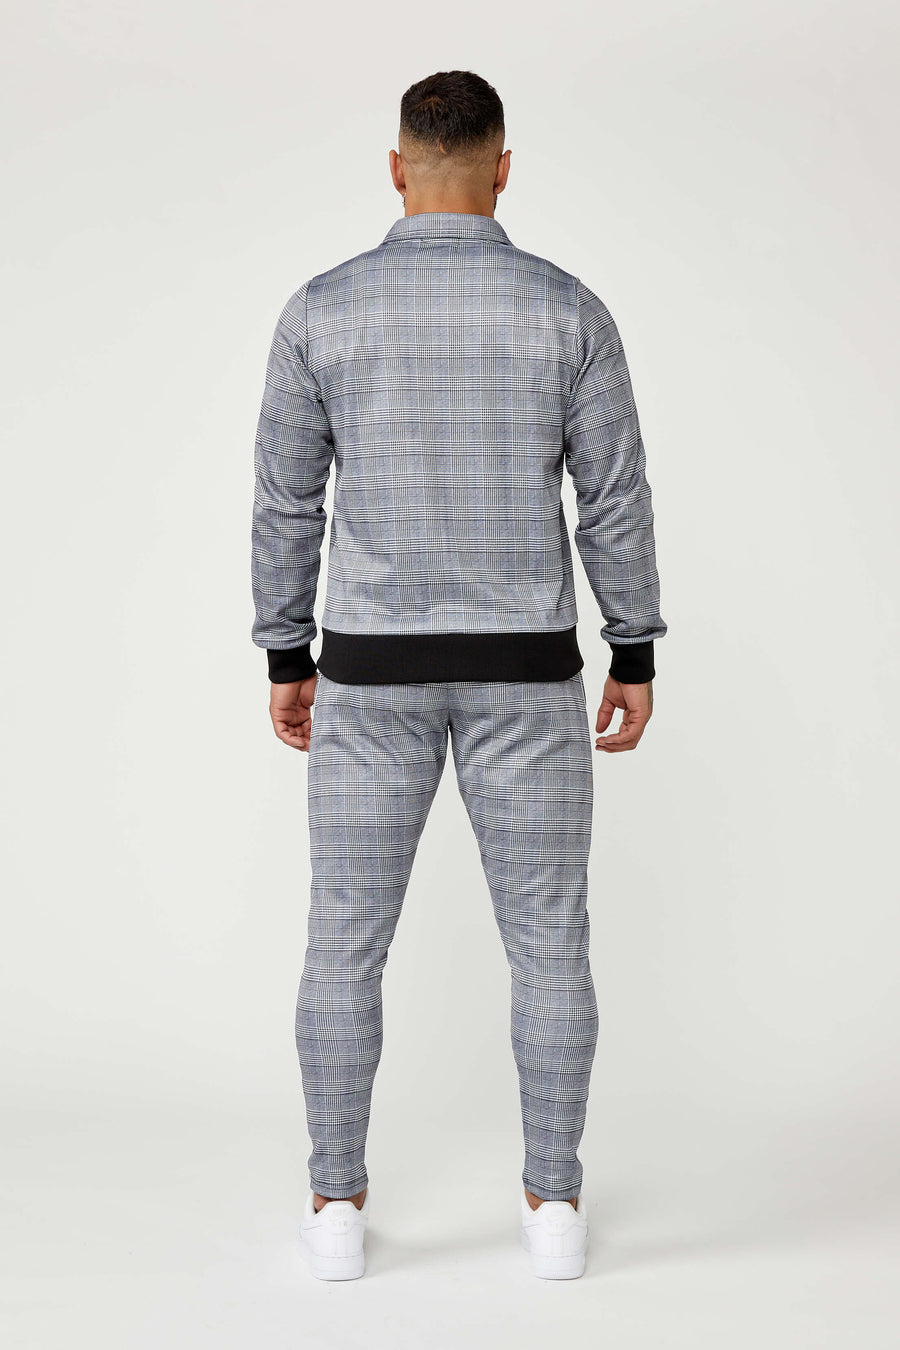 Legend London Tracksuits Smart Track Jacket In Check - Grey